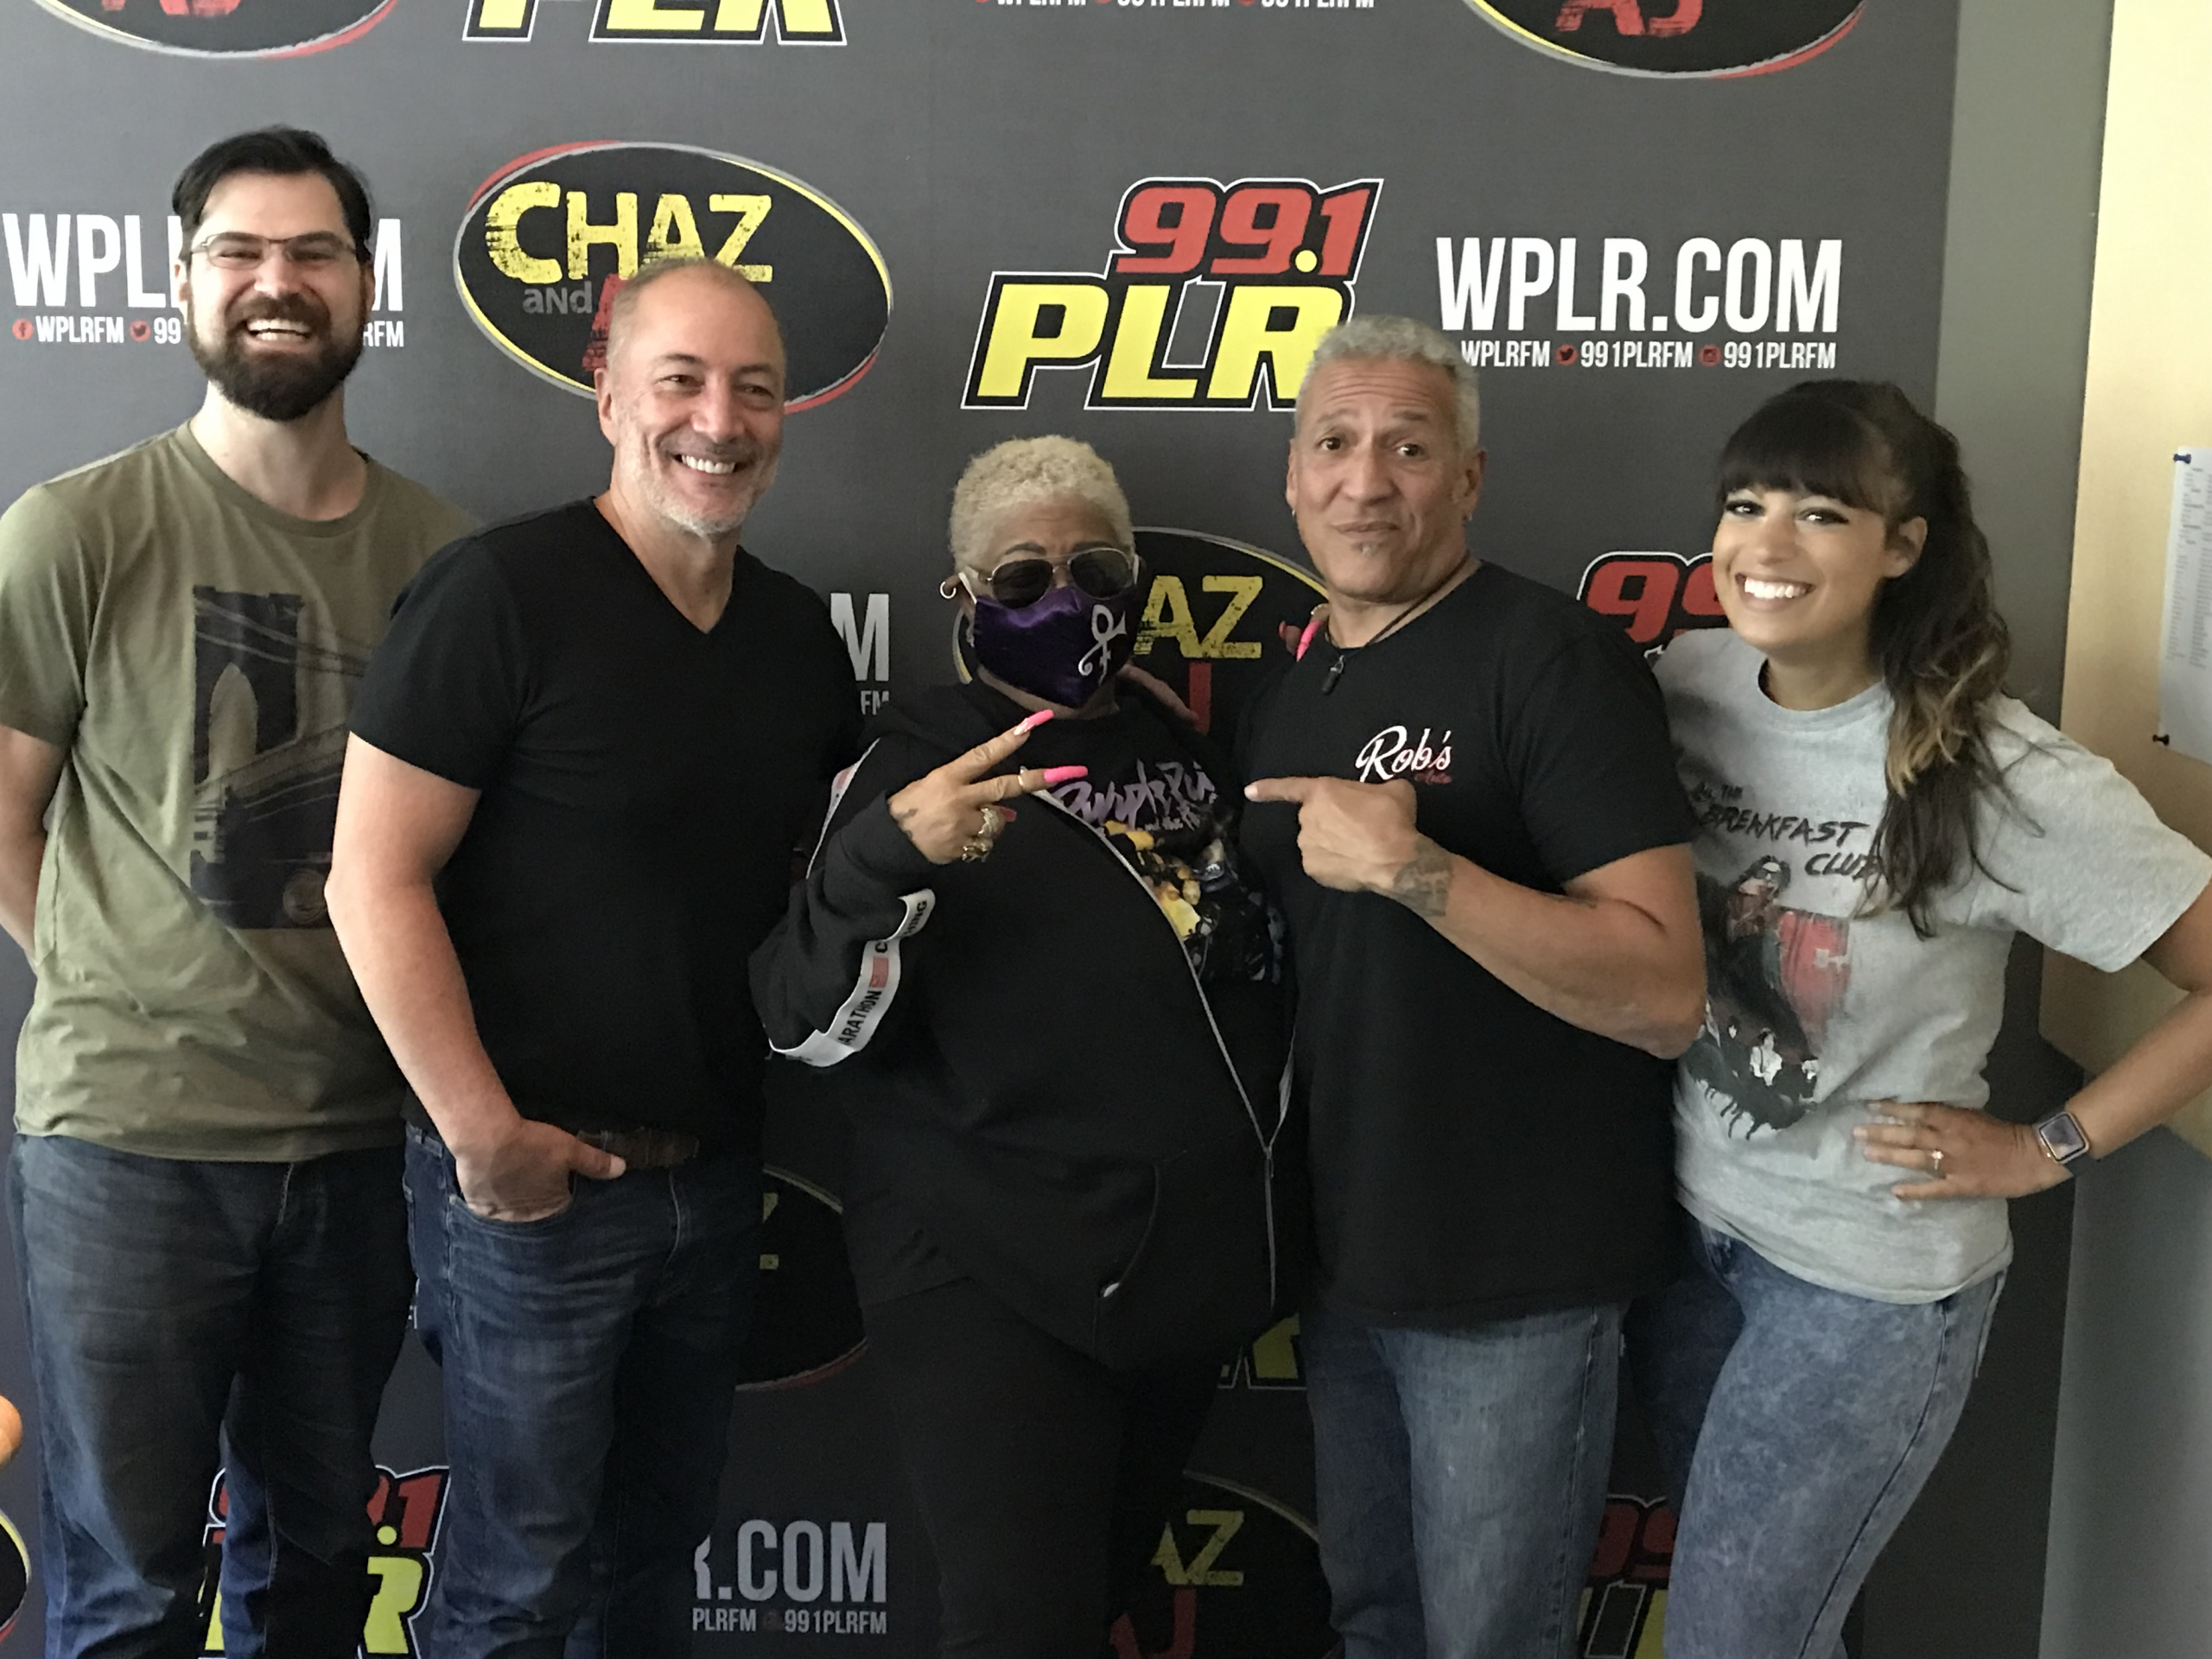 PODCAST – Friday, September 10: Comedian Luenell Has A Crush On AJ; Overrated Fall Things; Flubble Friday Montage